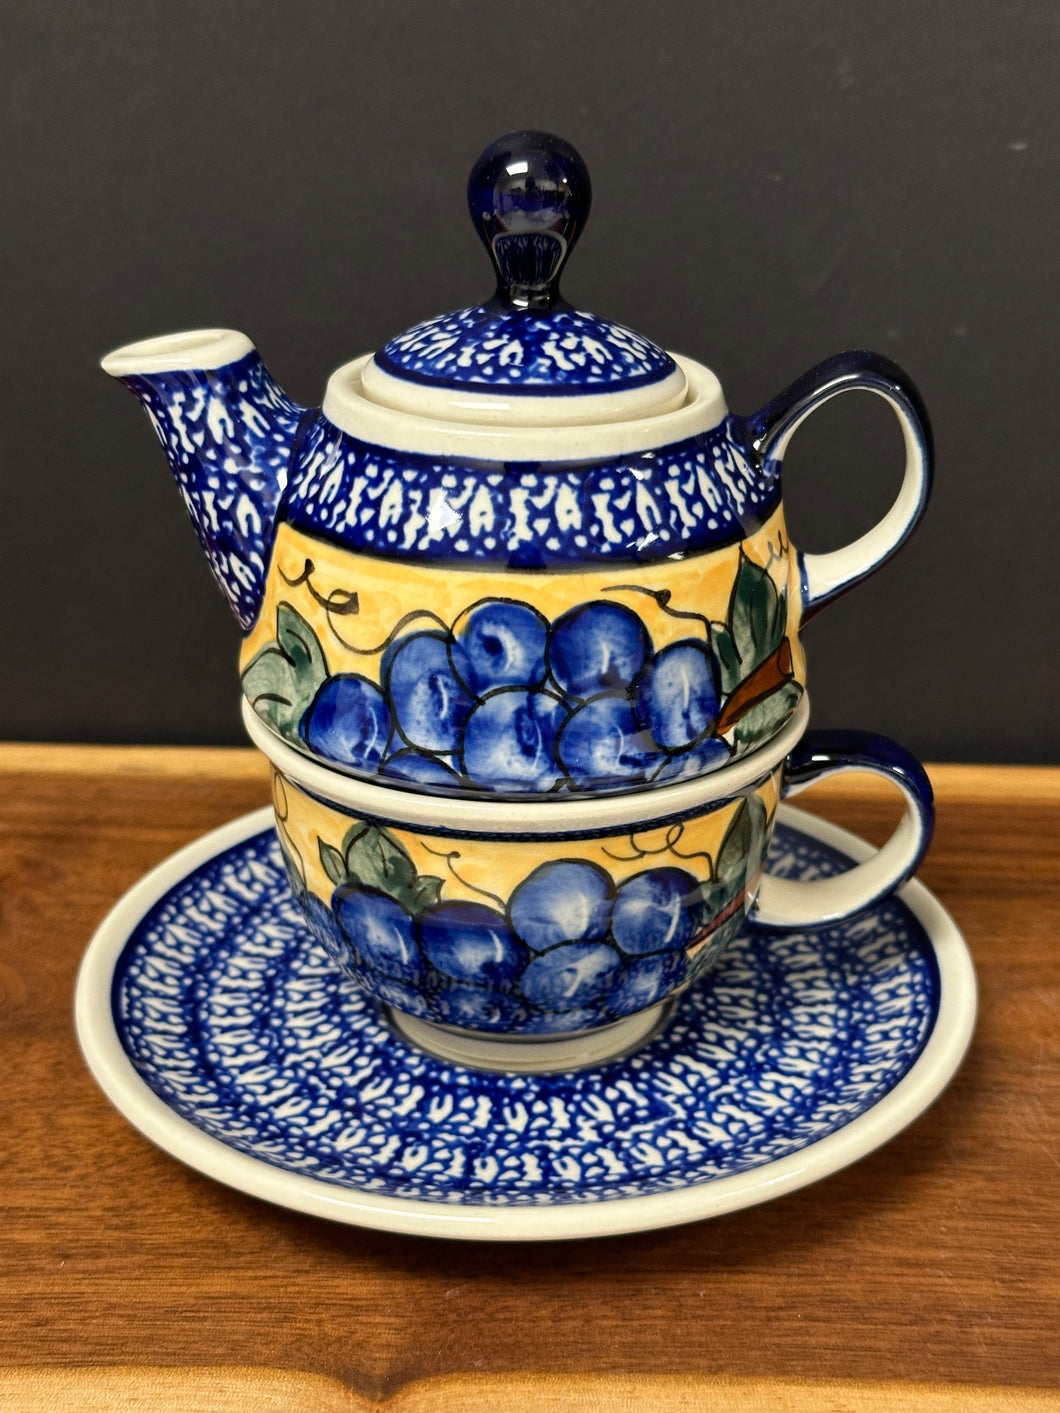 Teapot for One, 12 oz. - Tuscan Grapes